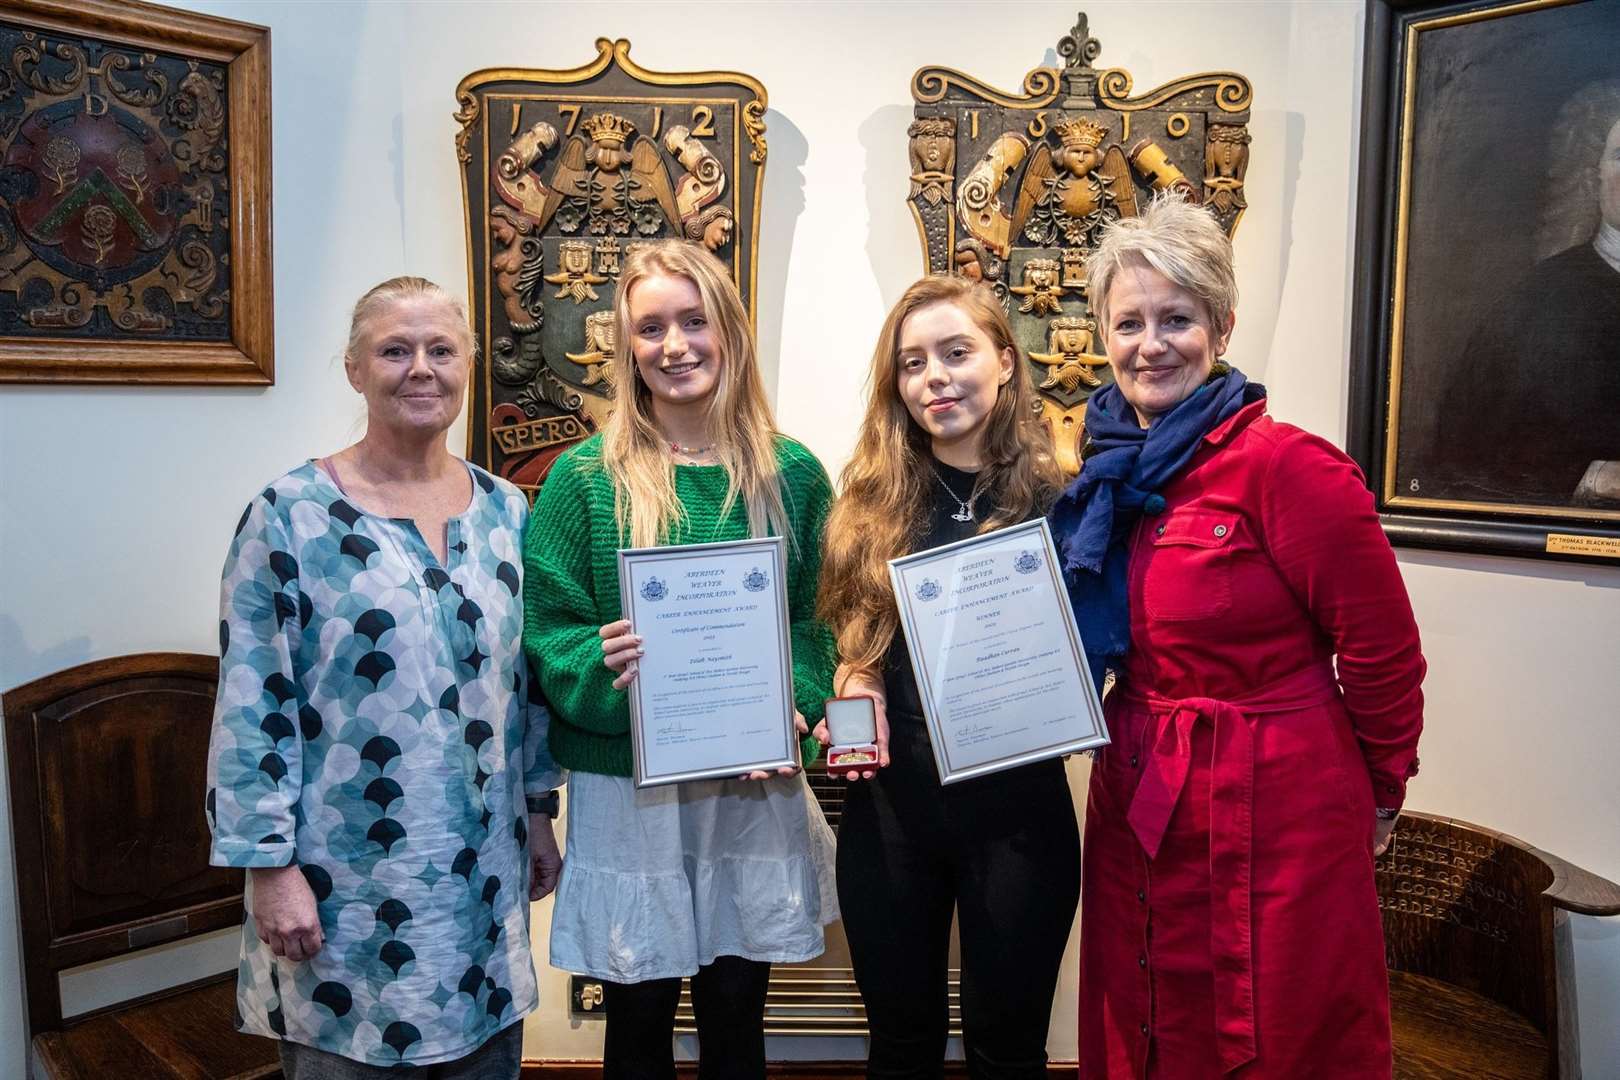 Head of Fashion and Textiles at Gray’s School of Art, Elaine Gowans, runner up Eilidh Naysmith, winner Ruadhan Curran, Dean of Gray’s School of Art, Libby Curtis (right). Picture: Martin Parker, Gatehouse Design Agency